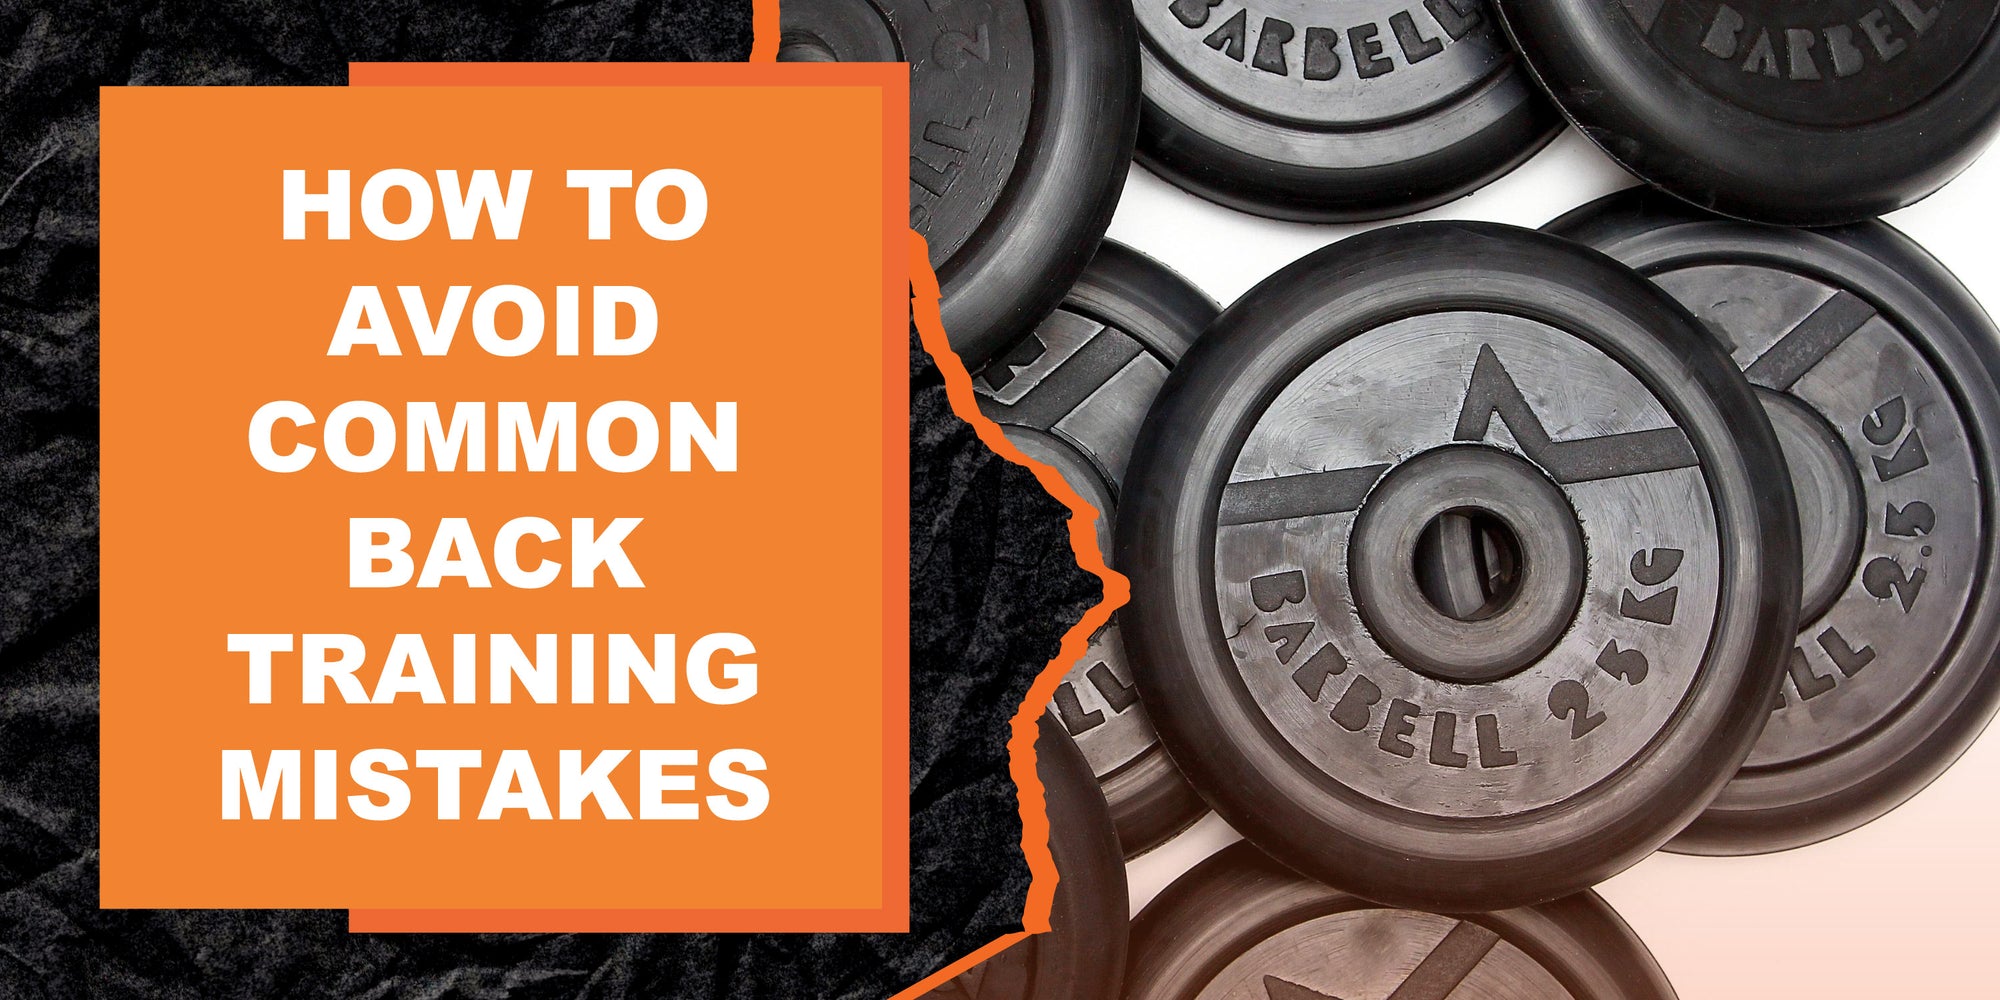 How to Avoid Common Back Training Mistakes